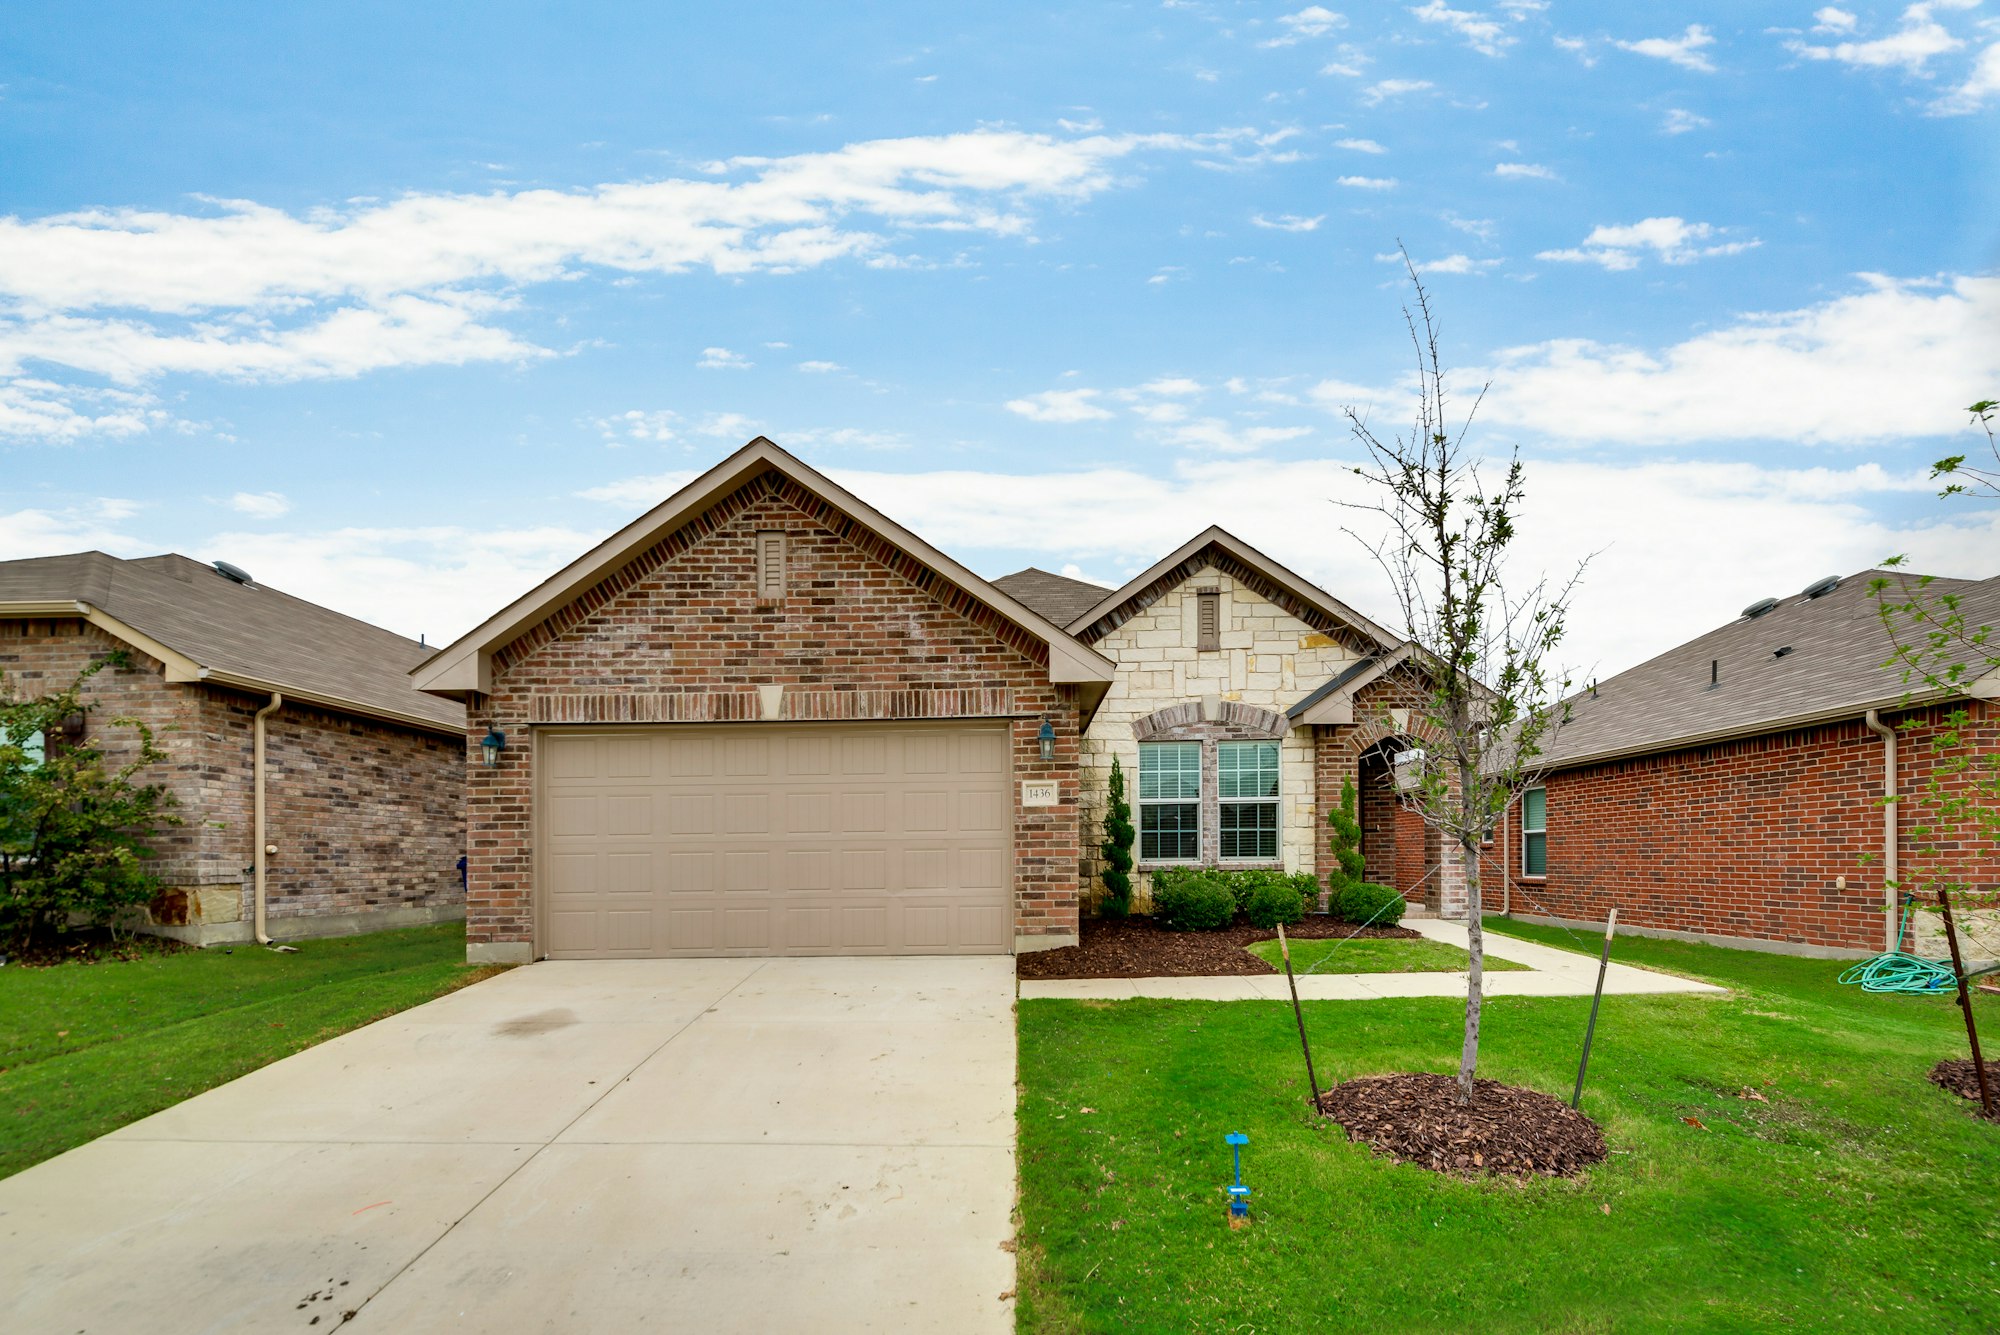 Photo 1 of 25 - 1436 Willoughby Way, Little Elm, TX 75068